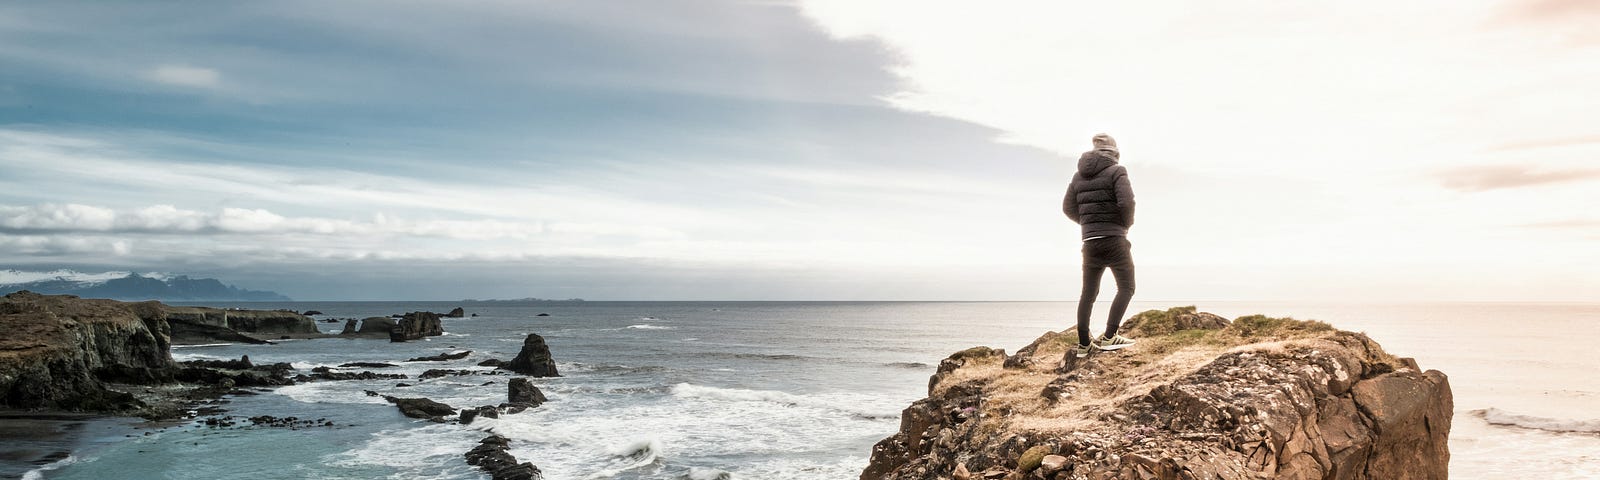 Man stands on a cliff overlooking ocean waters.